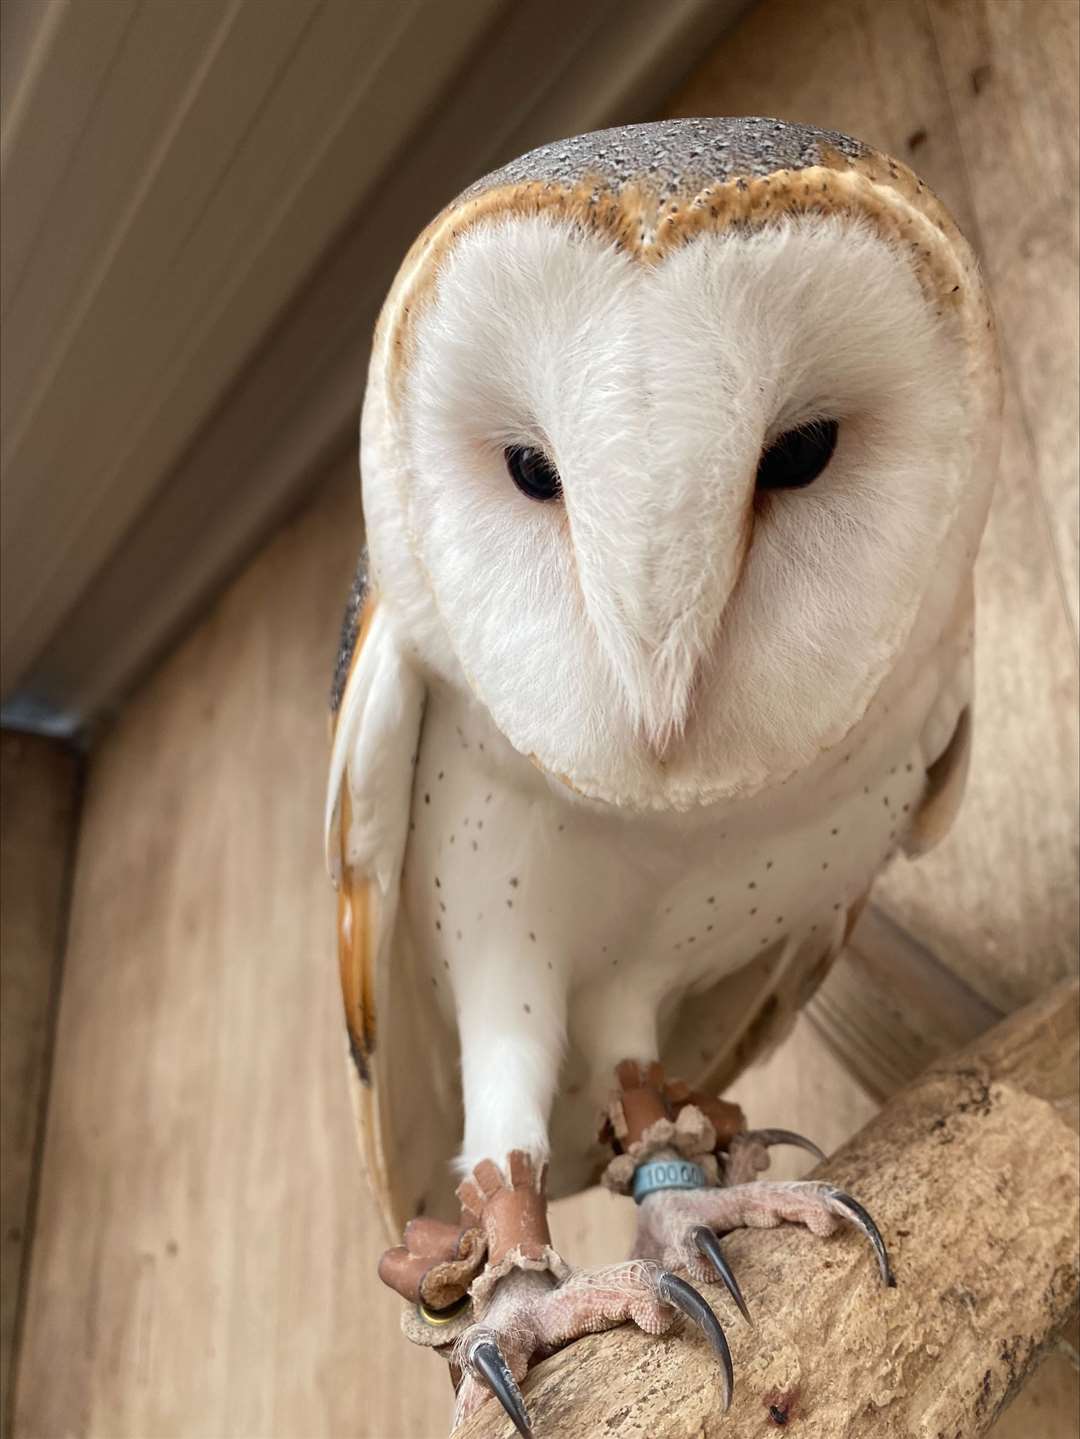 Shiraz the barn owl went missing after the alleged break-in but has since been found. (Capel Manor College/PA)